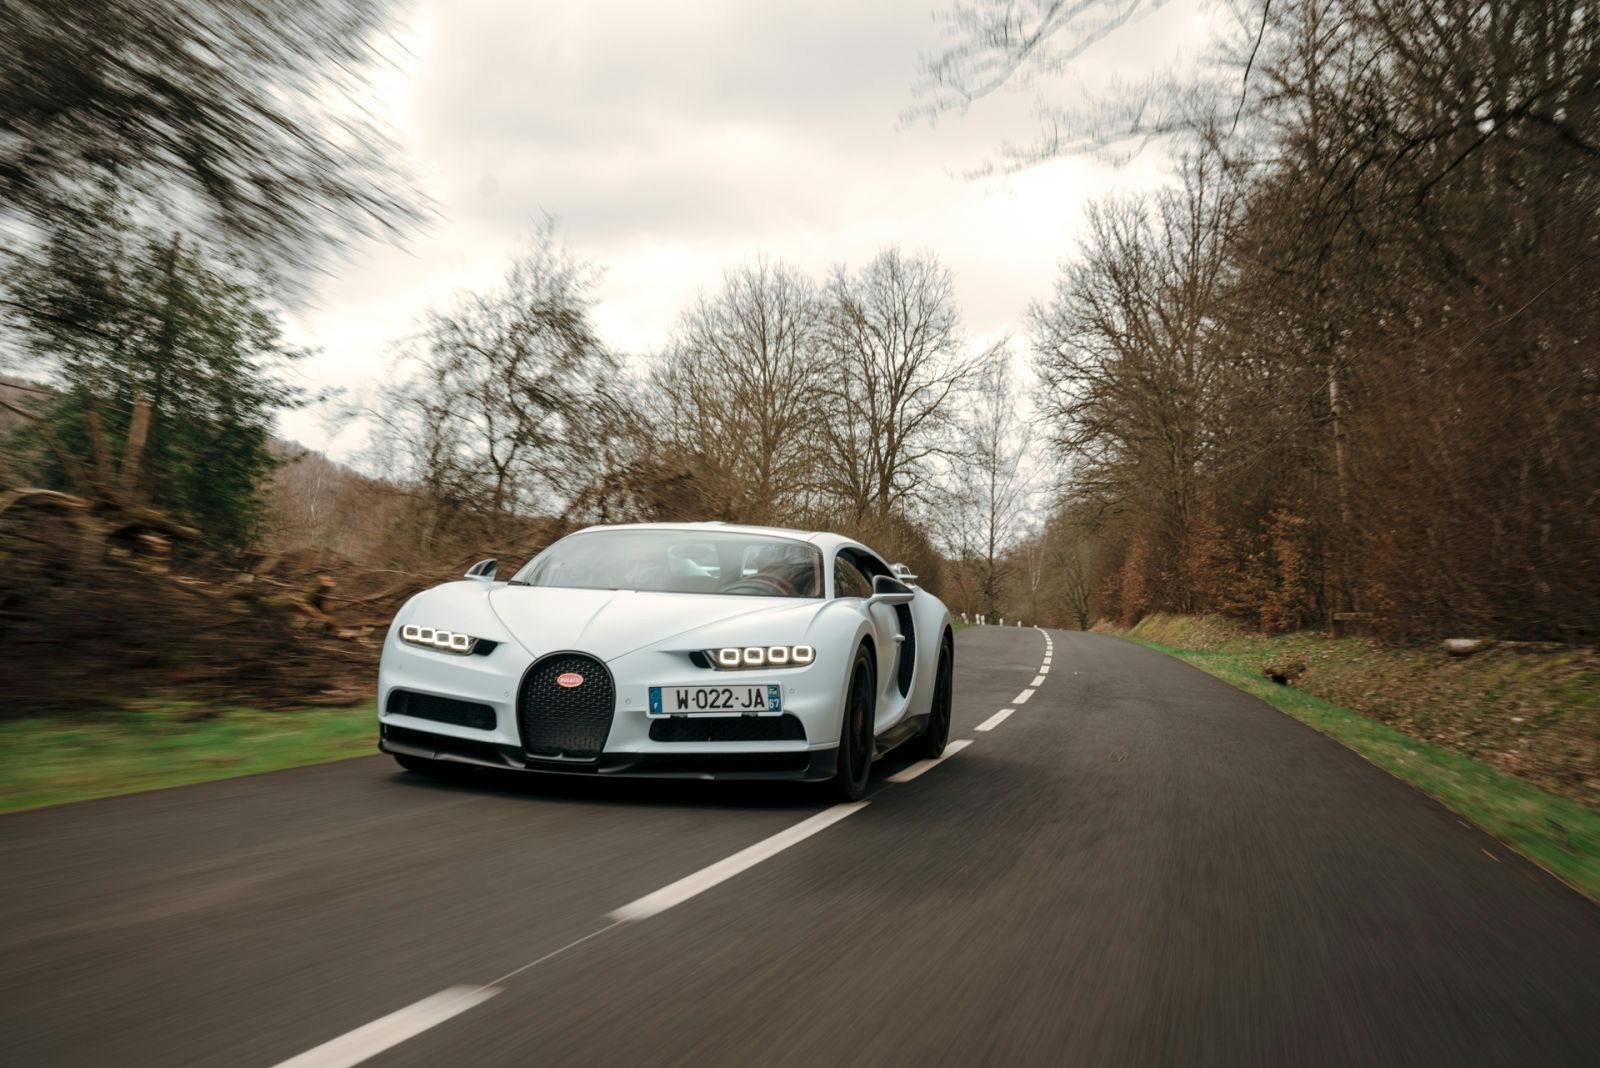 Test drive with the Bugatti Chiron Sport on the streets of Rambouillet, south west of Paris.